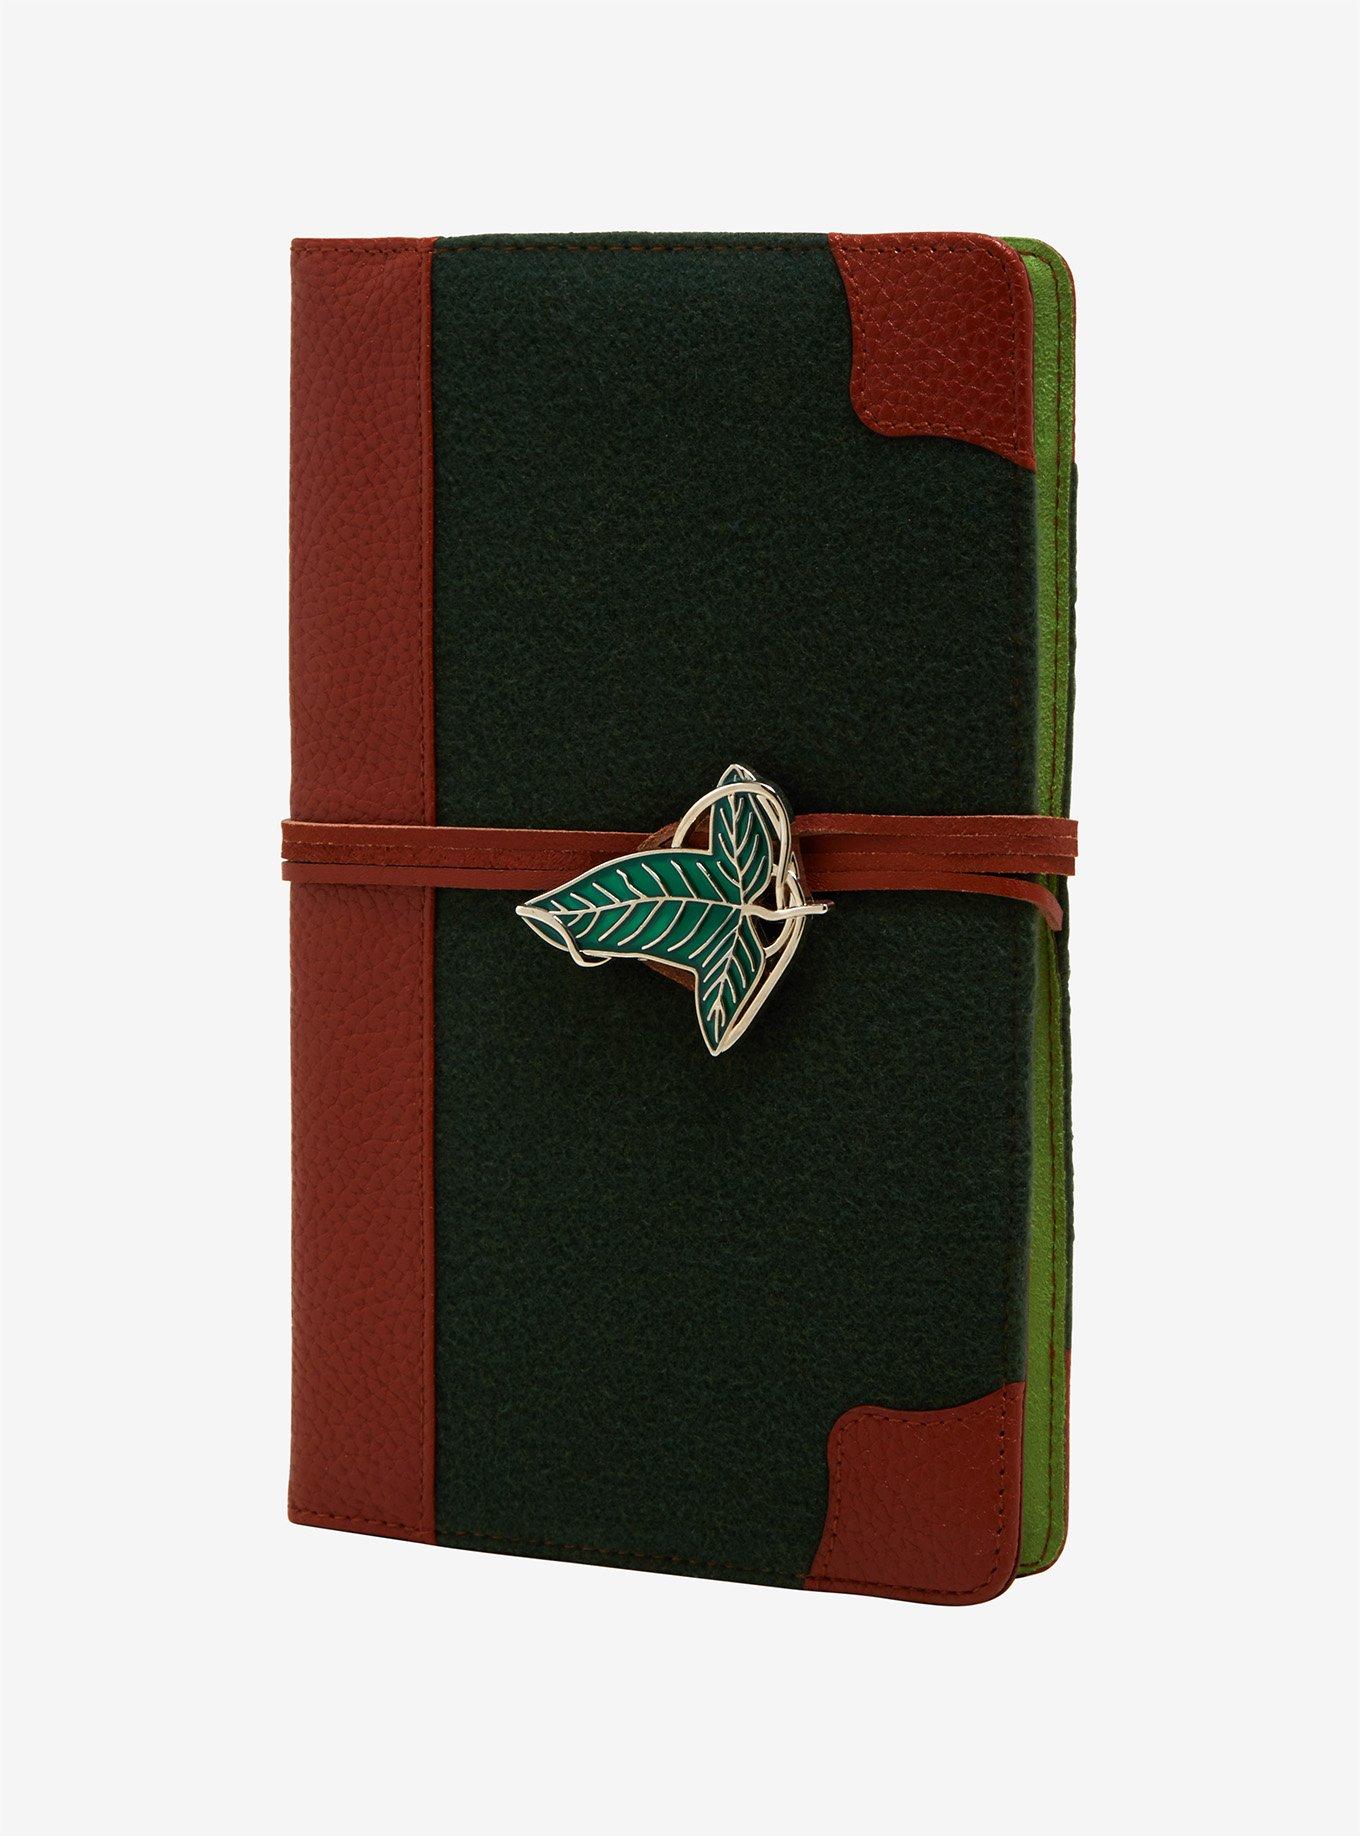 The Lord Of The Rings Travel Journal